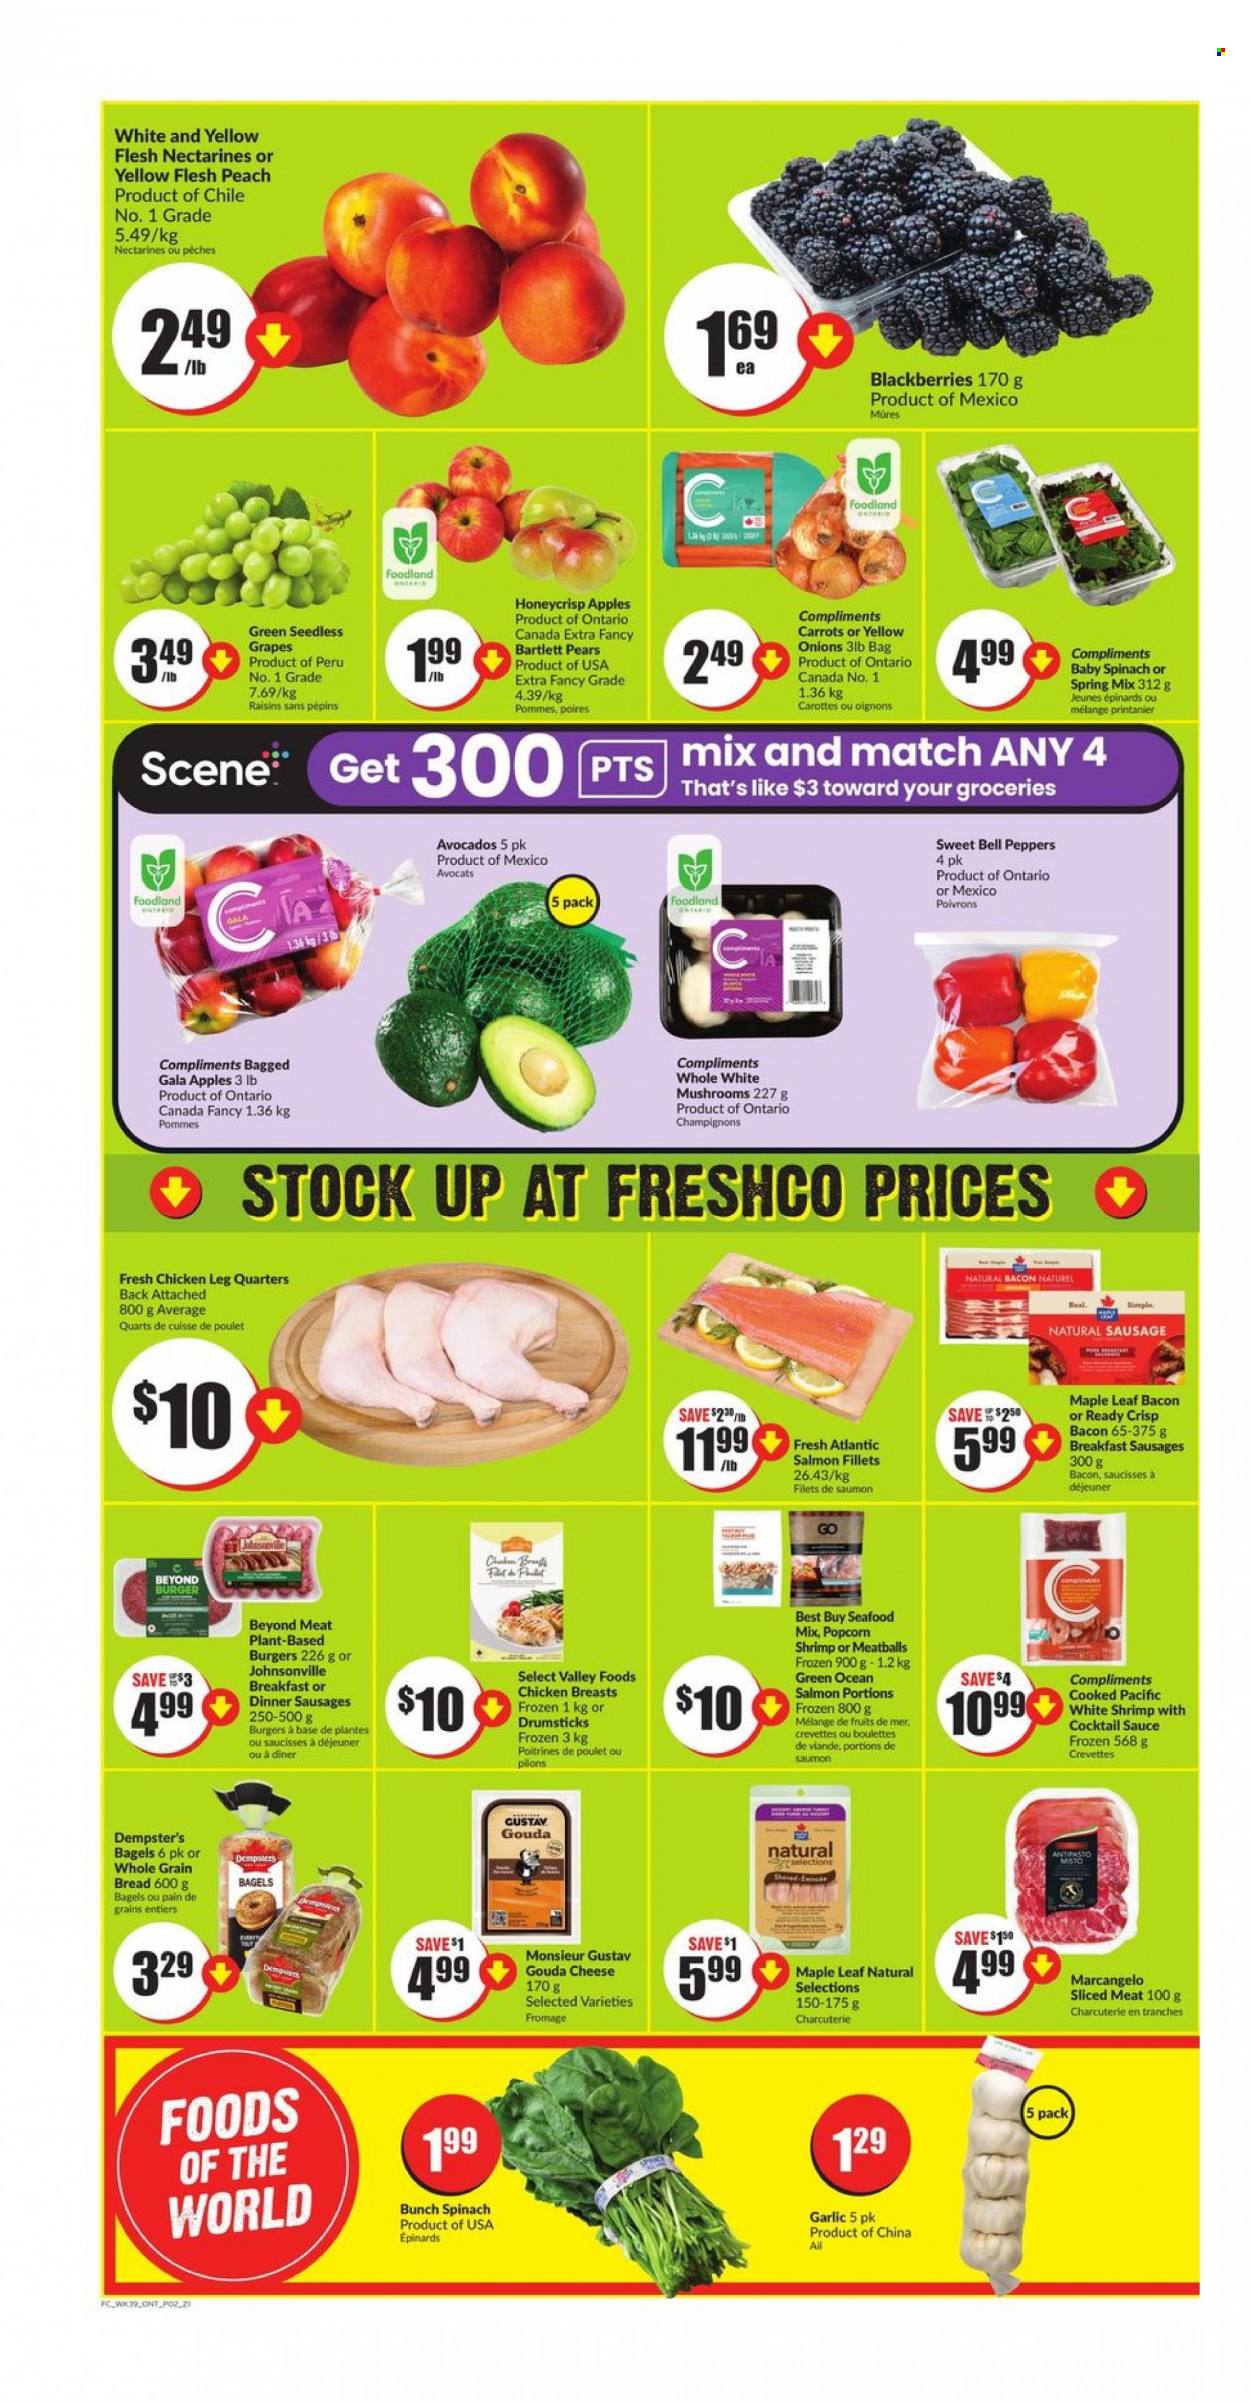 thumbnail - FreshCo. Flyer - January 26, 2023 - February 01, 2023 - Sales products - mushrooms, bread, bell peppers, carrots, garlic, onion, peppers, apples, avocado, Bartlett pears, blackberries, Gala, grapes, nectarines, seedless grapes, pears, salmon, salmon fillet, seafood, shrimps, meatballs, hamburger, sauce, bacon, Johnsonville, sausage, gouda, cheese, cocktail sauce, dried fruit, chicken breasts, chicken legs, raisins. Page 2.